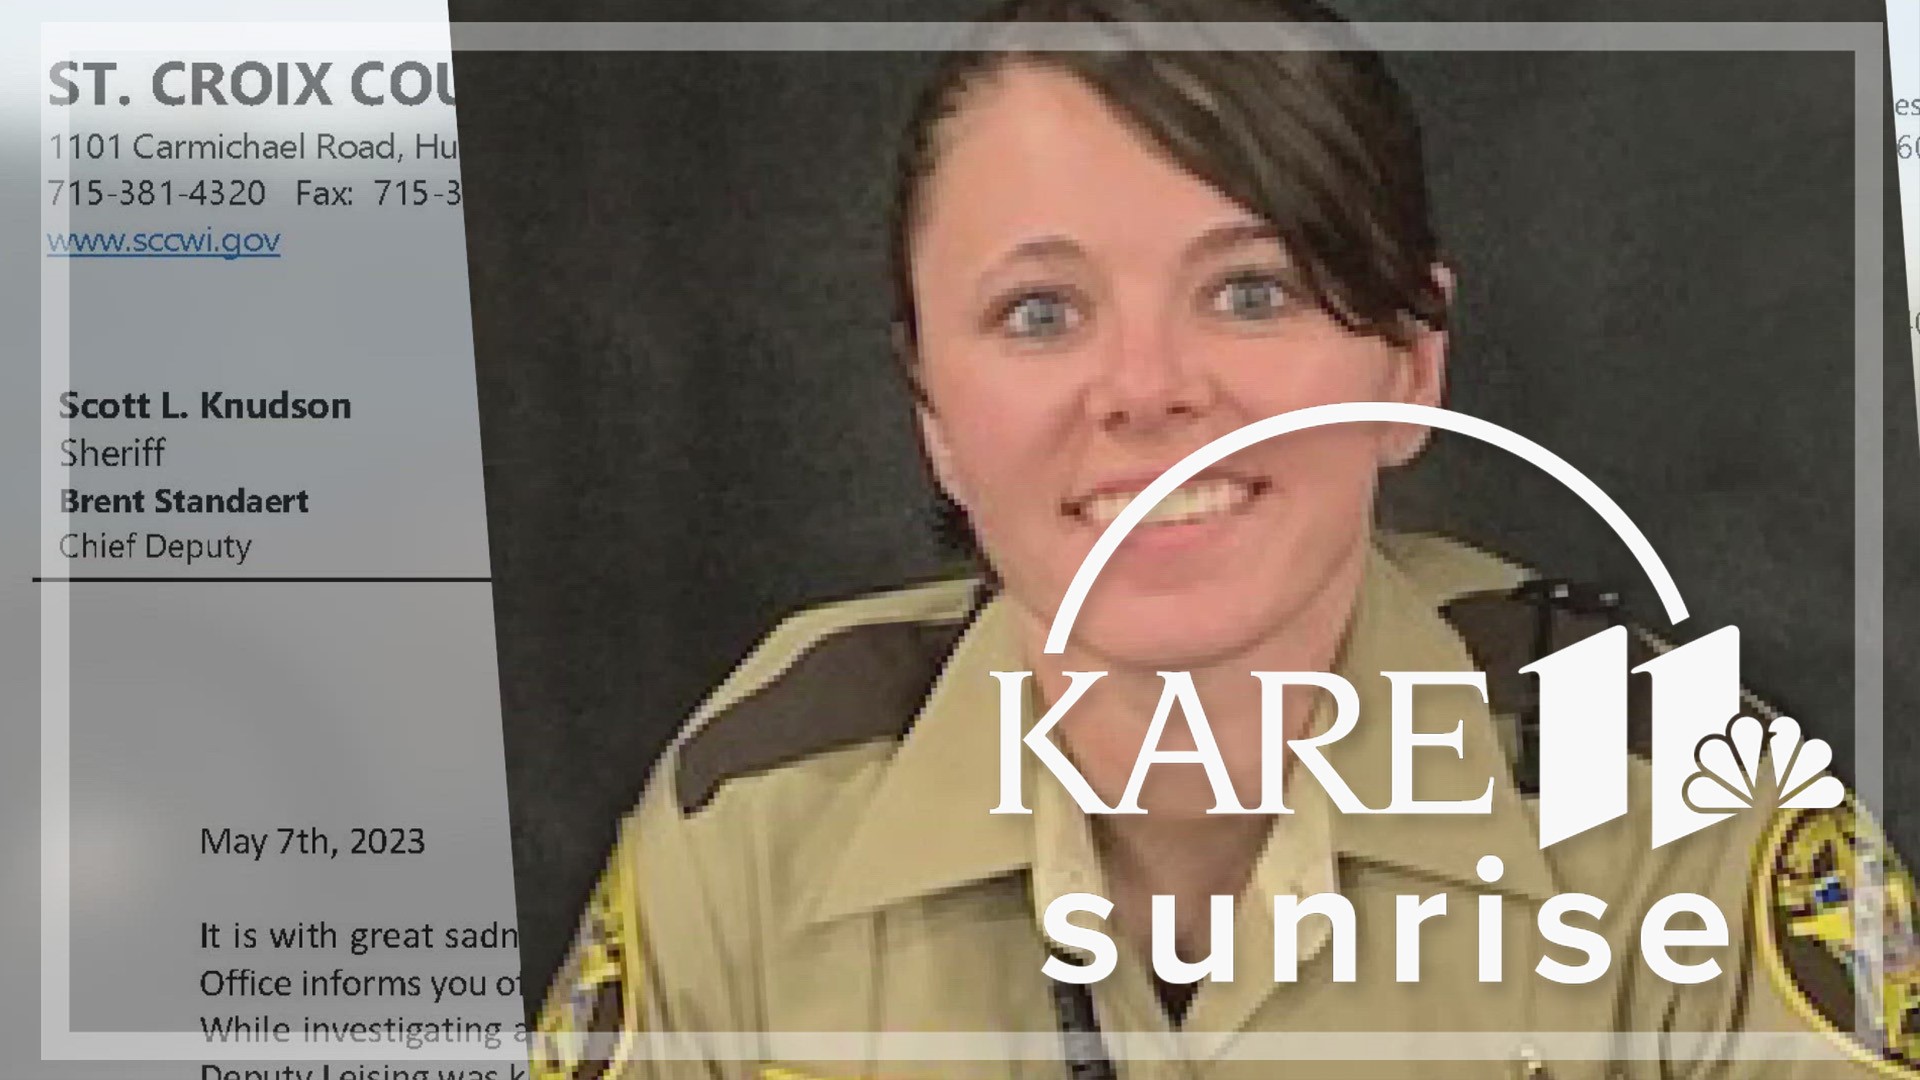 Deputy Kaitie Leising, 29, was killed when she exchanged gunfire with a possibly impaired driver by the side of the road.